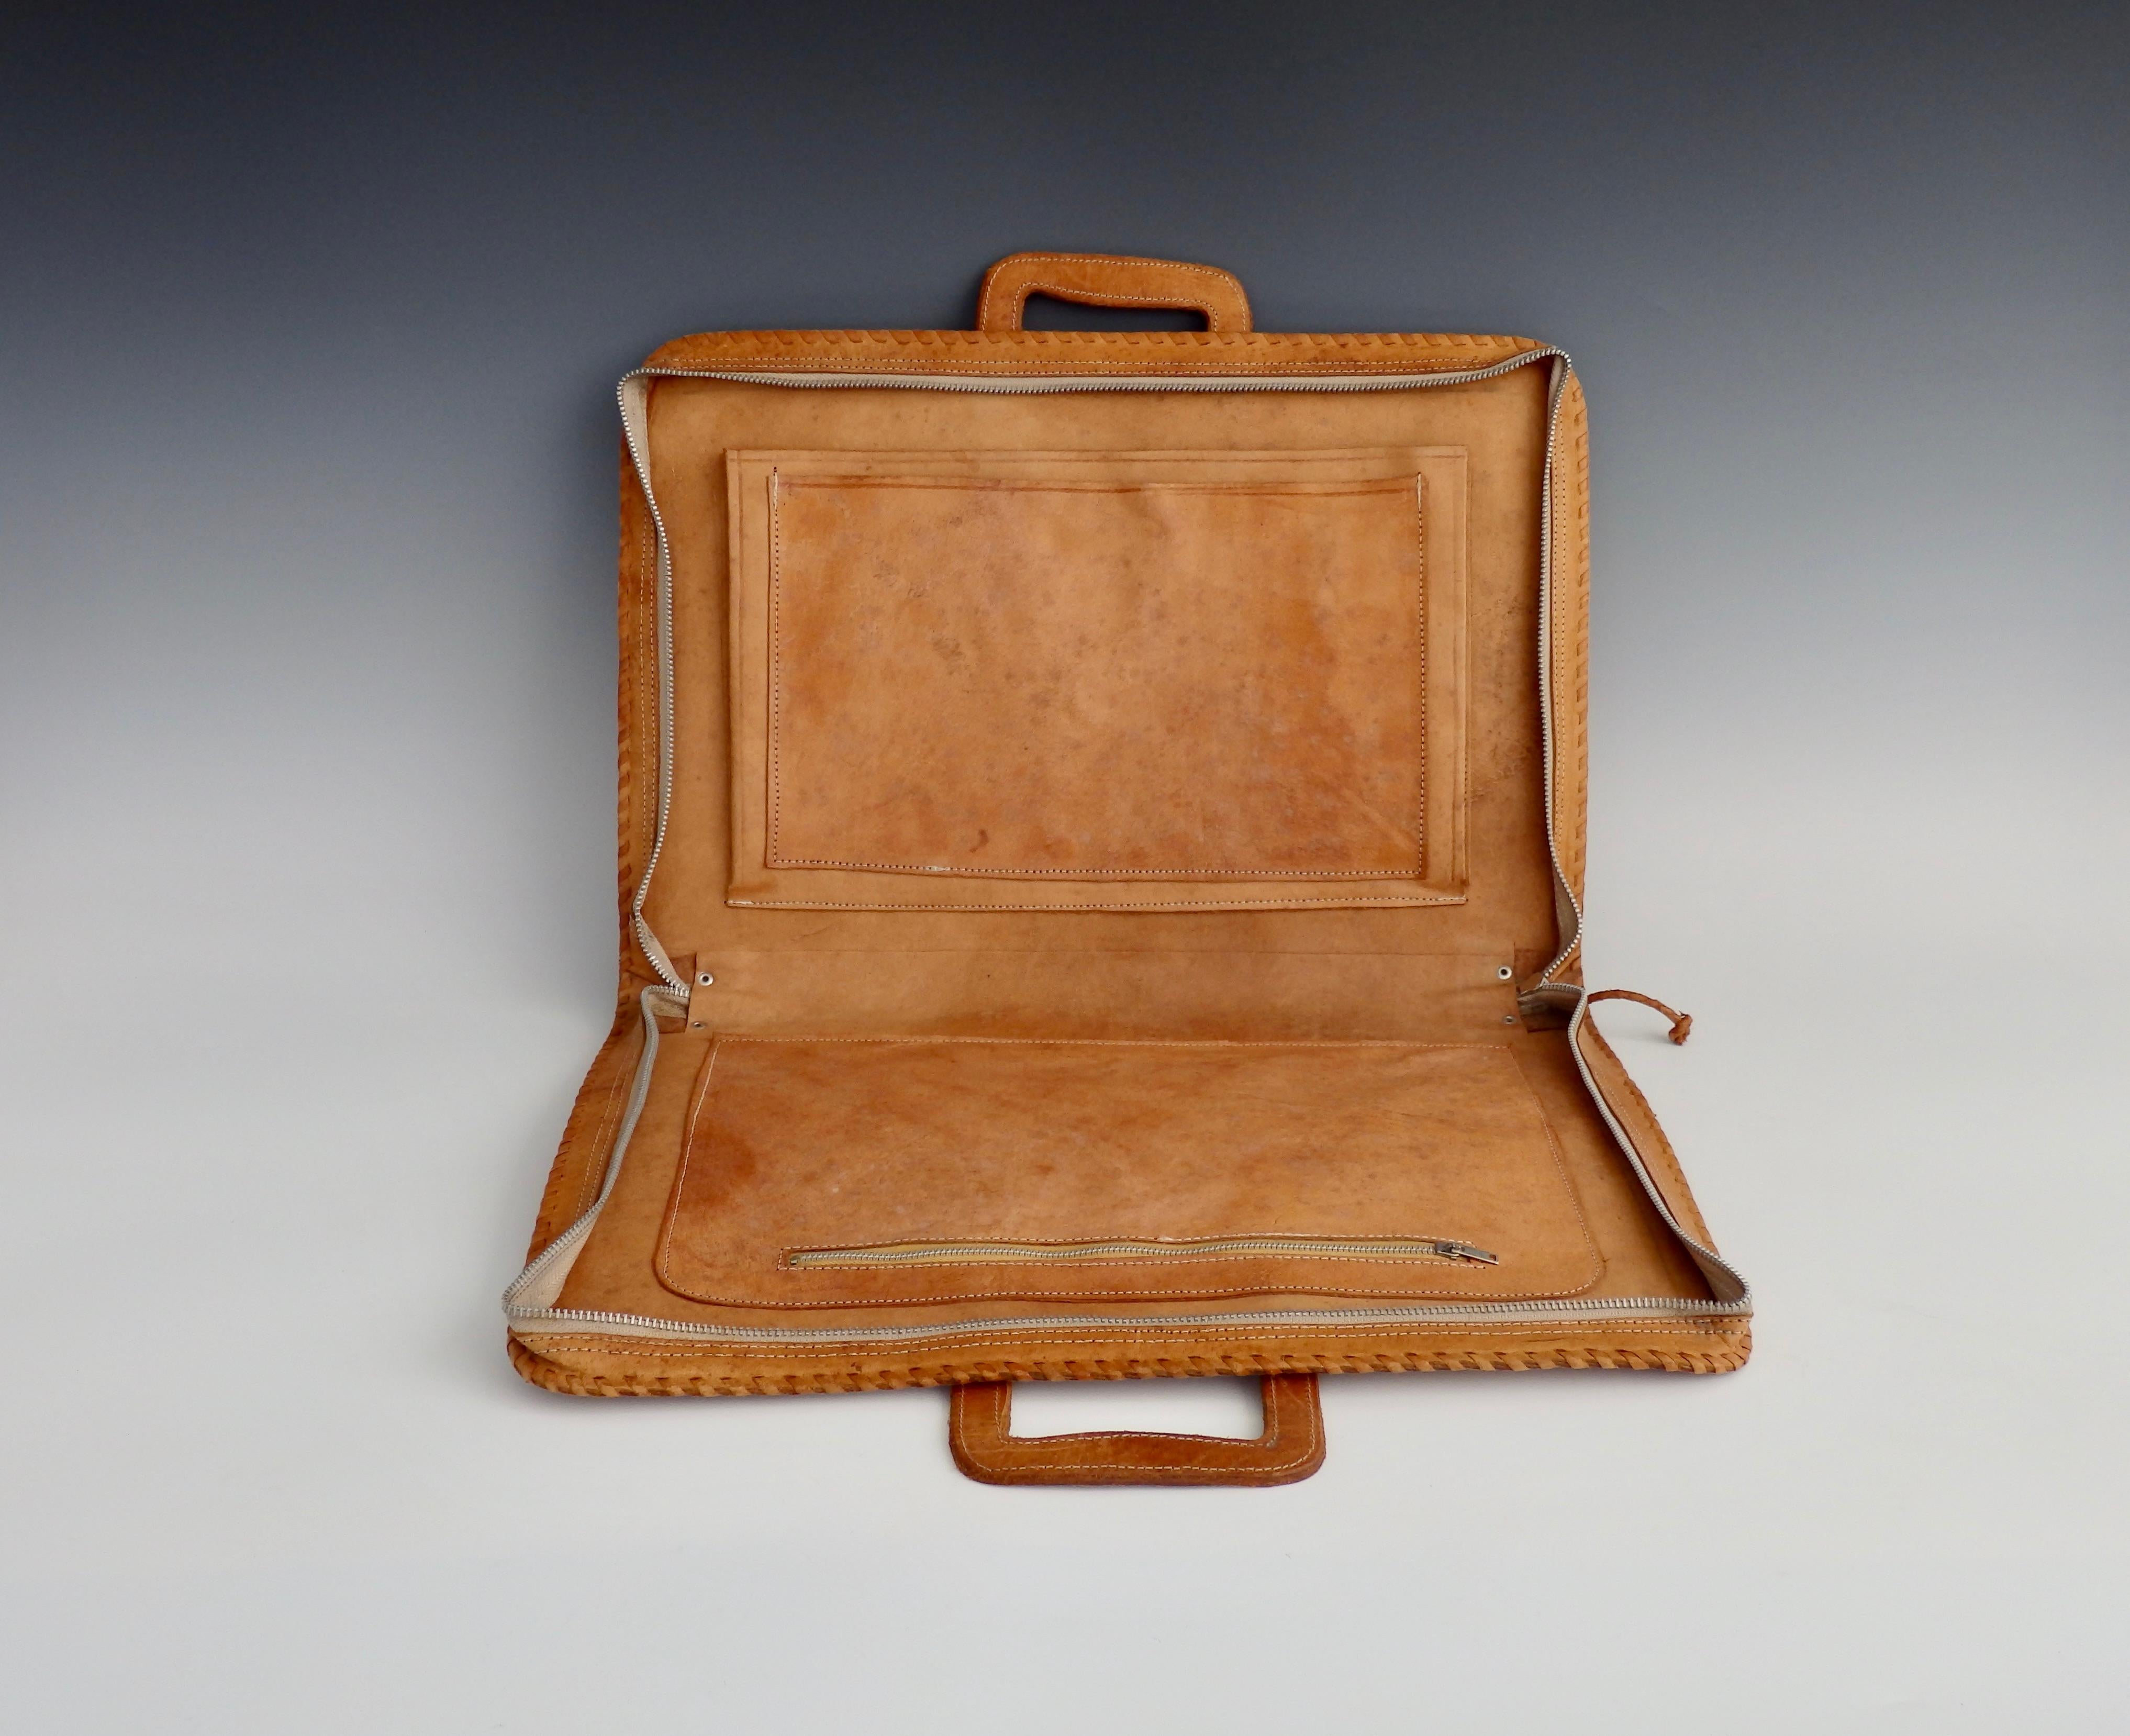 Western Style Hand Tooled Leather Attache Case In Good Condition For Sale In Ferndale, MI